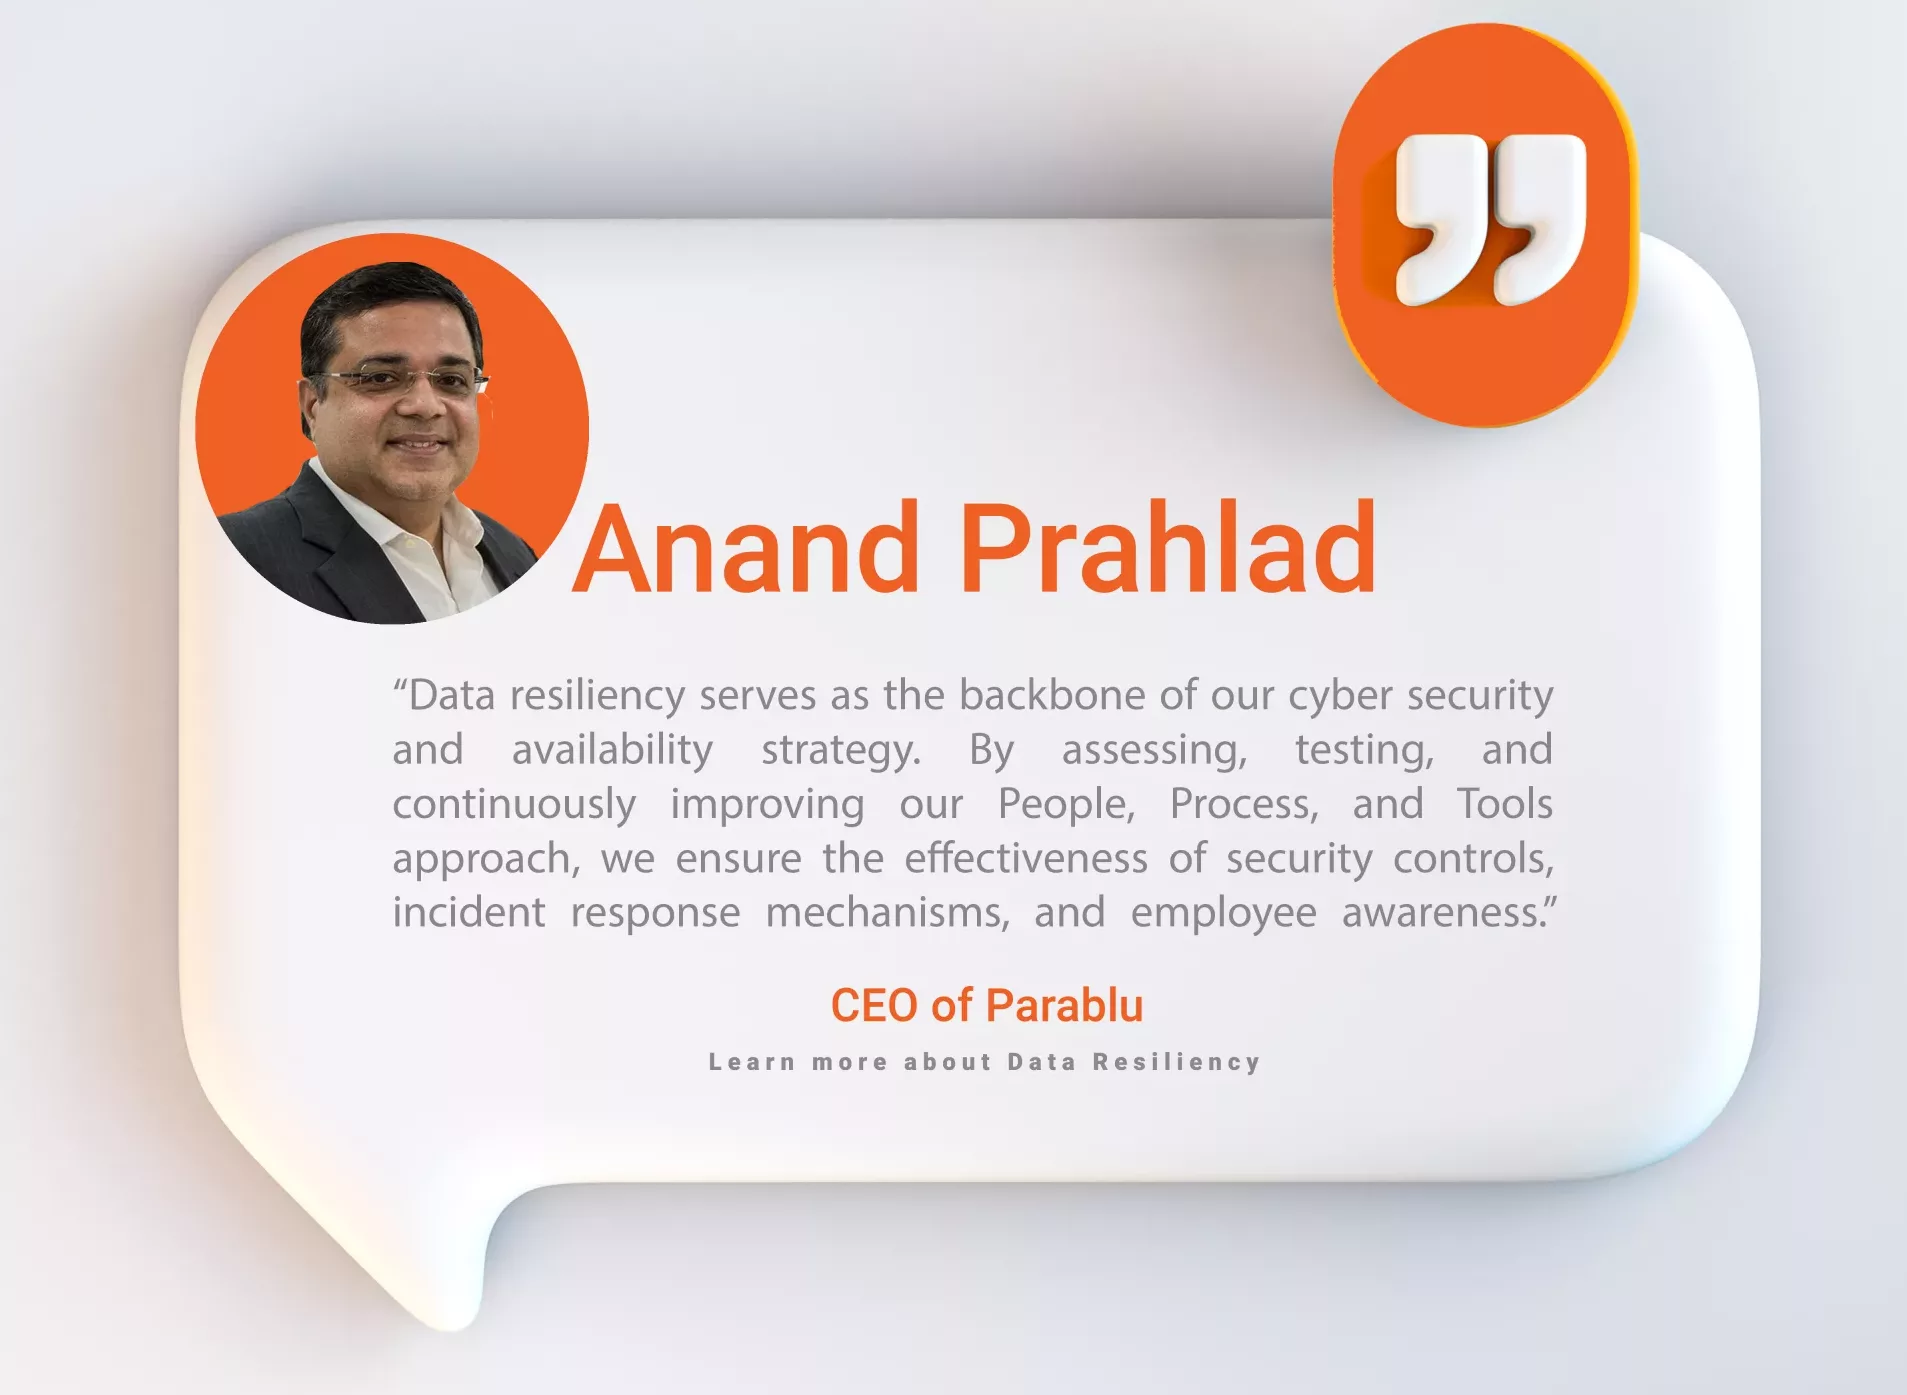 Anand Prahlad - CEO of Parablu - Data resiliency expert